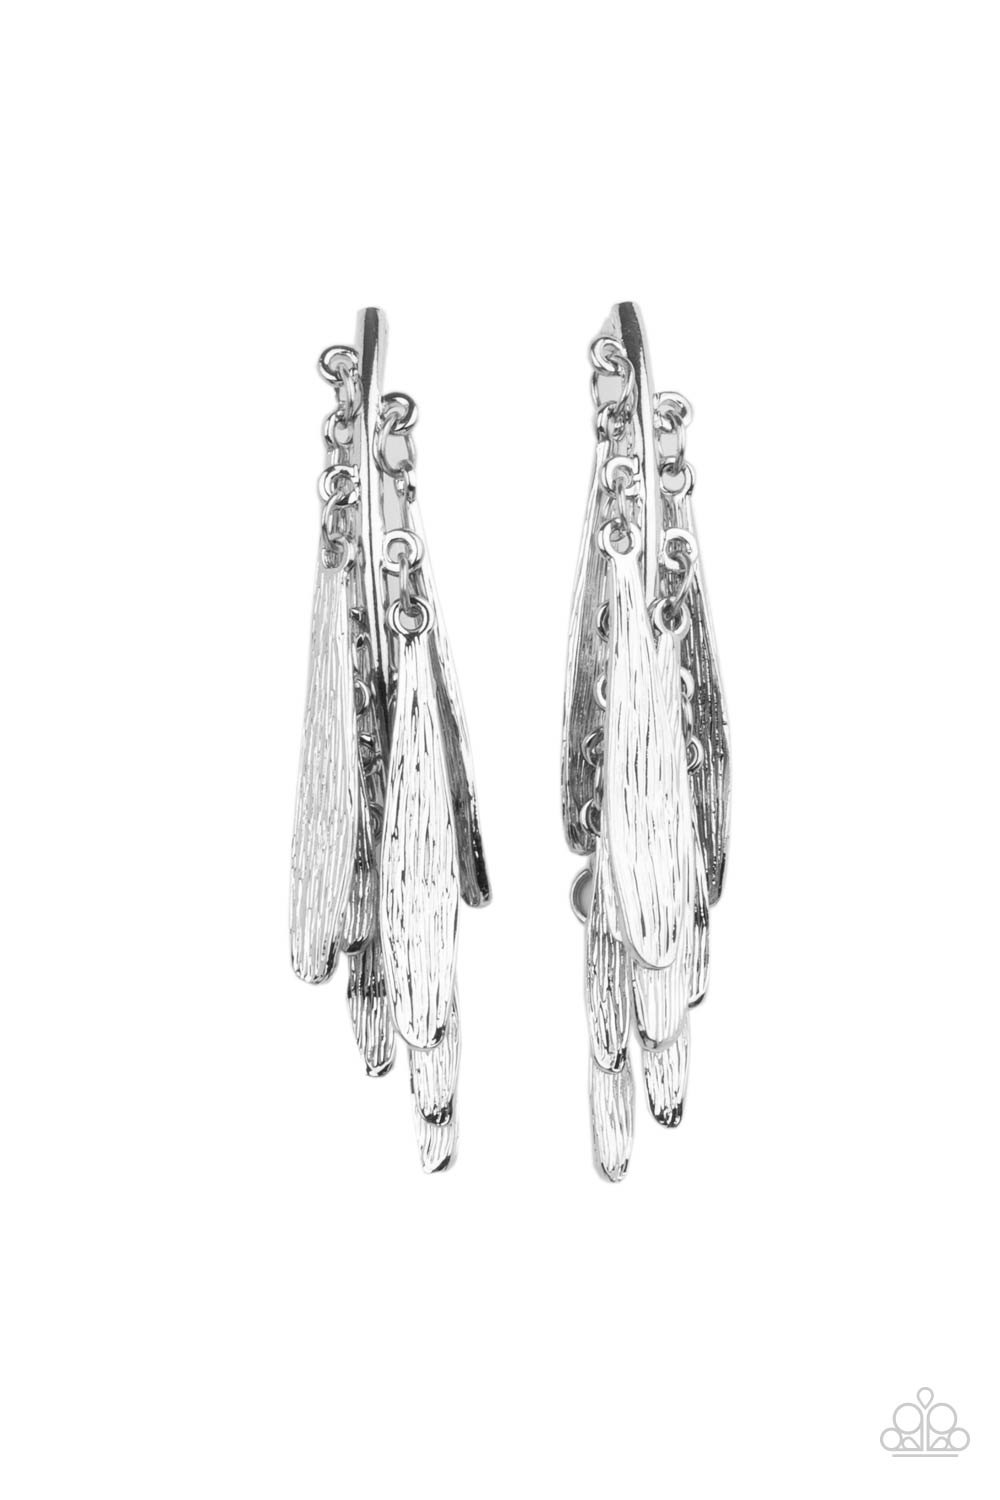 Paparazzi Accessories Pursuing the Plumes - Silver Earrings - Lady T Accessories